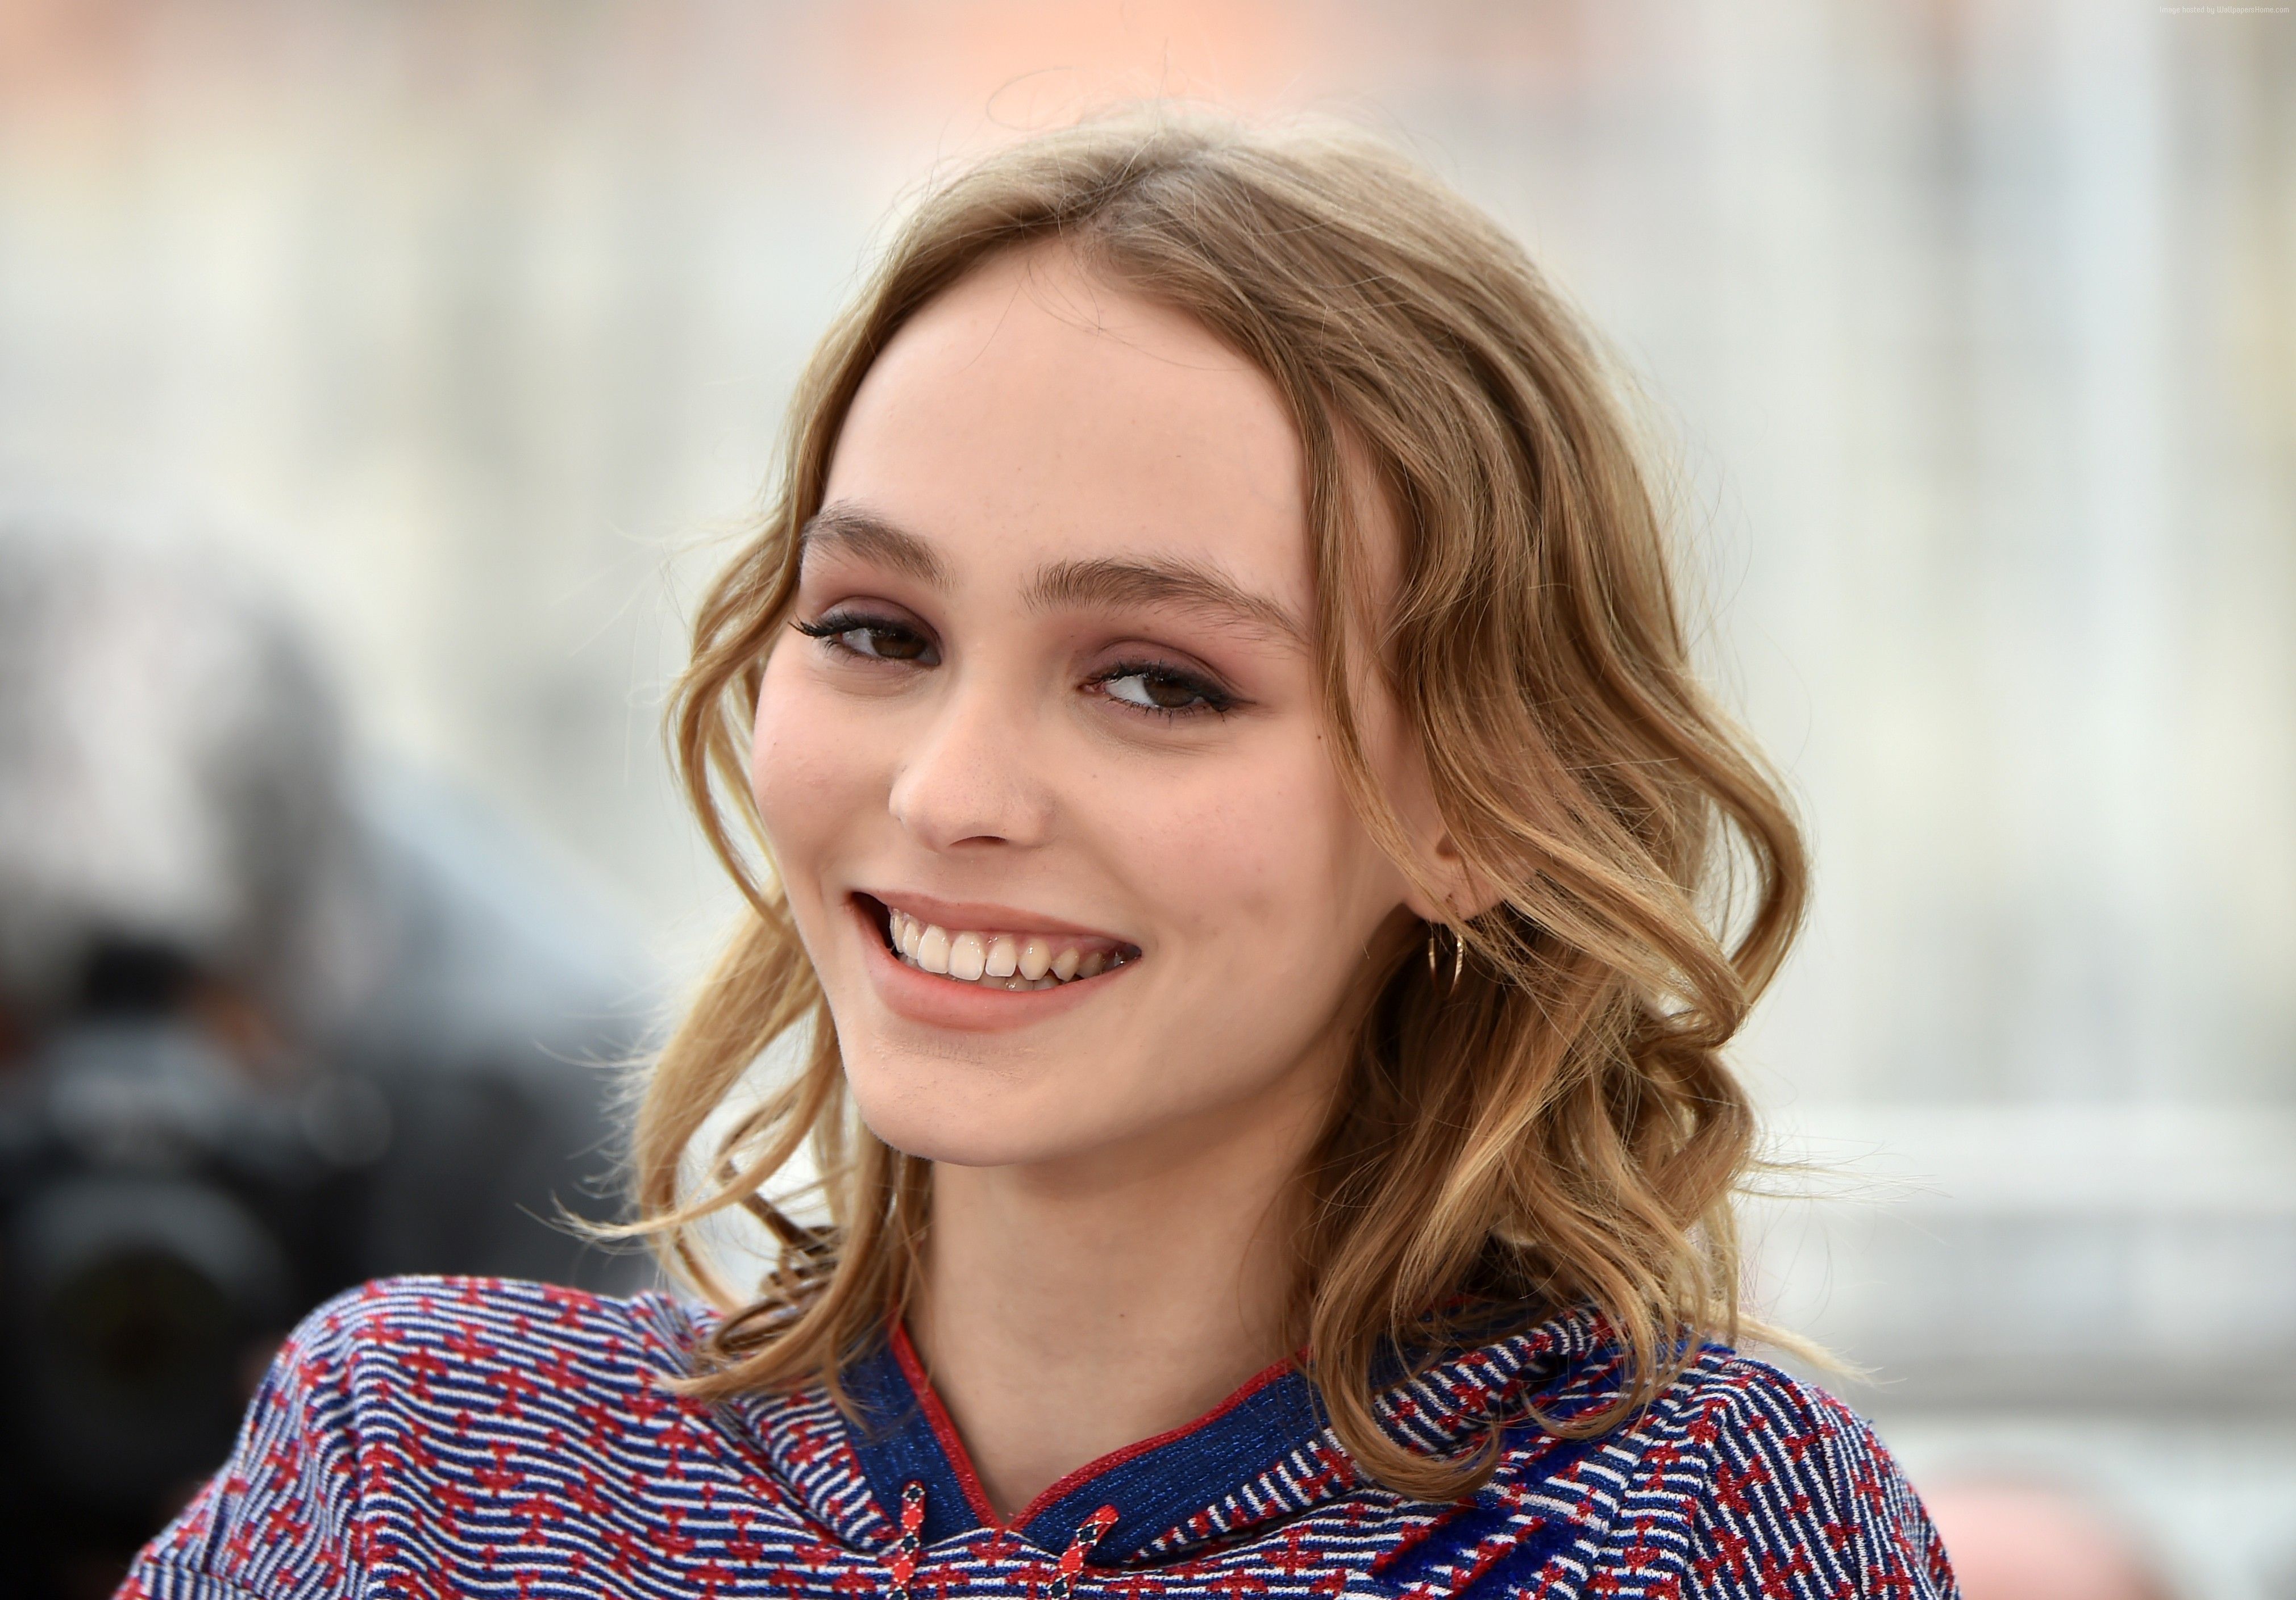 Lily Rose Depp Smile Wallpaper Background 61926 4040x2816px